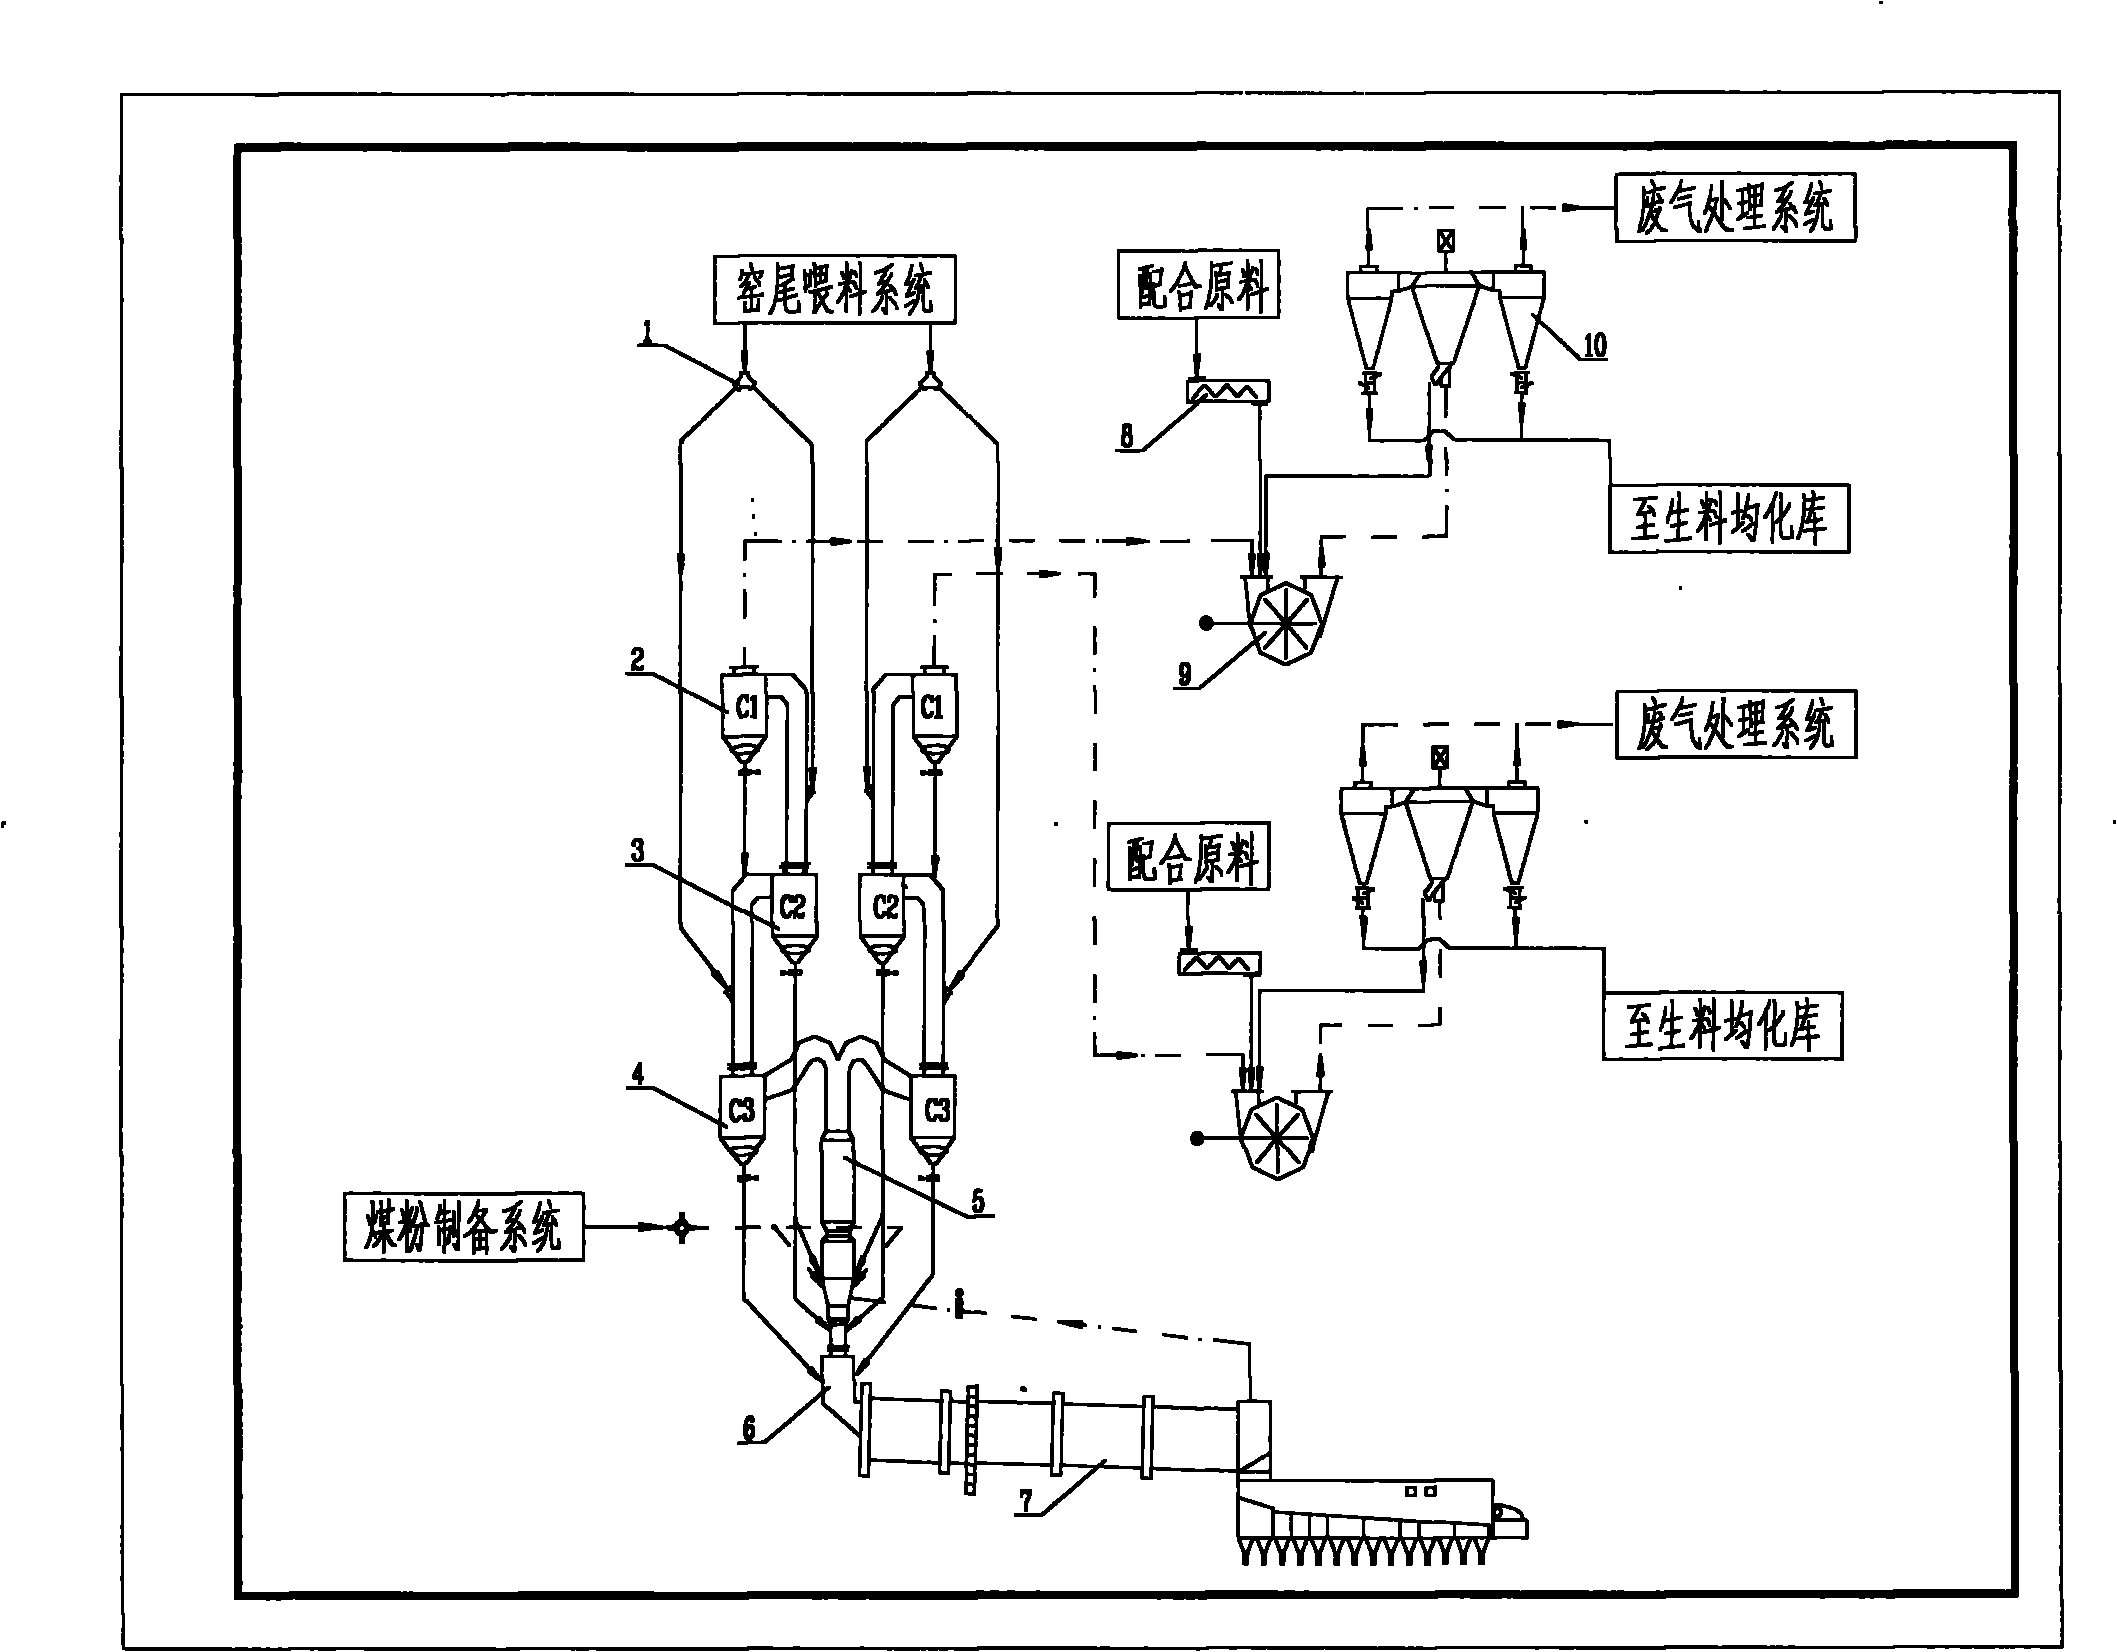 Method for producing cement clinker by calcining chalk